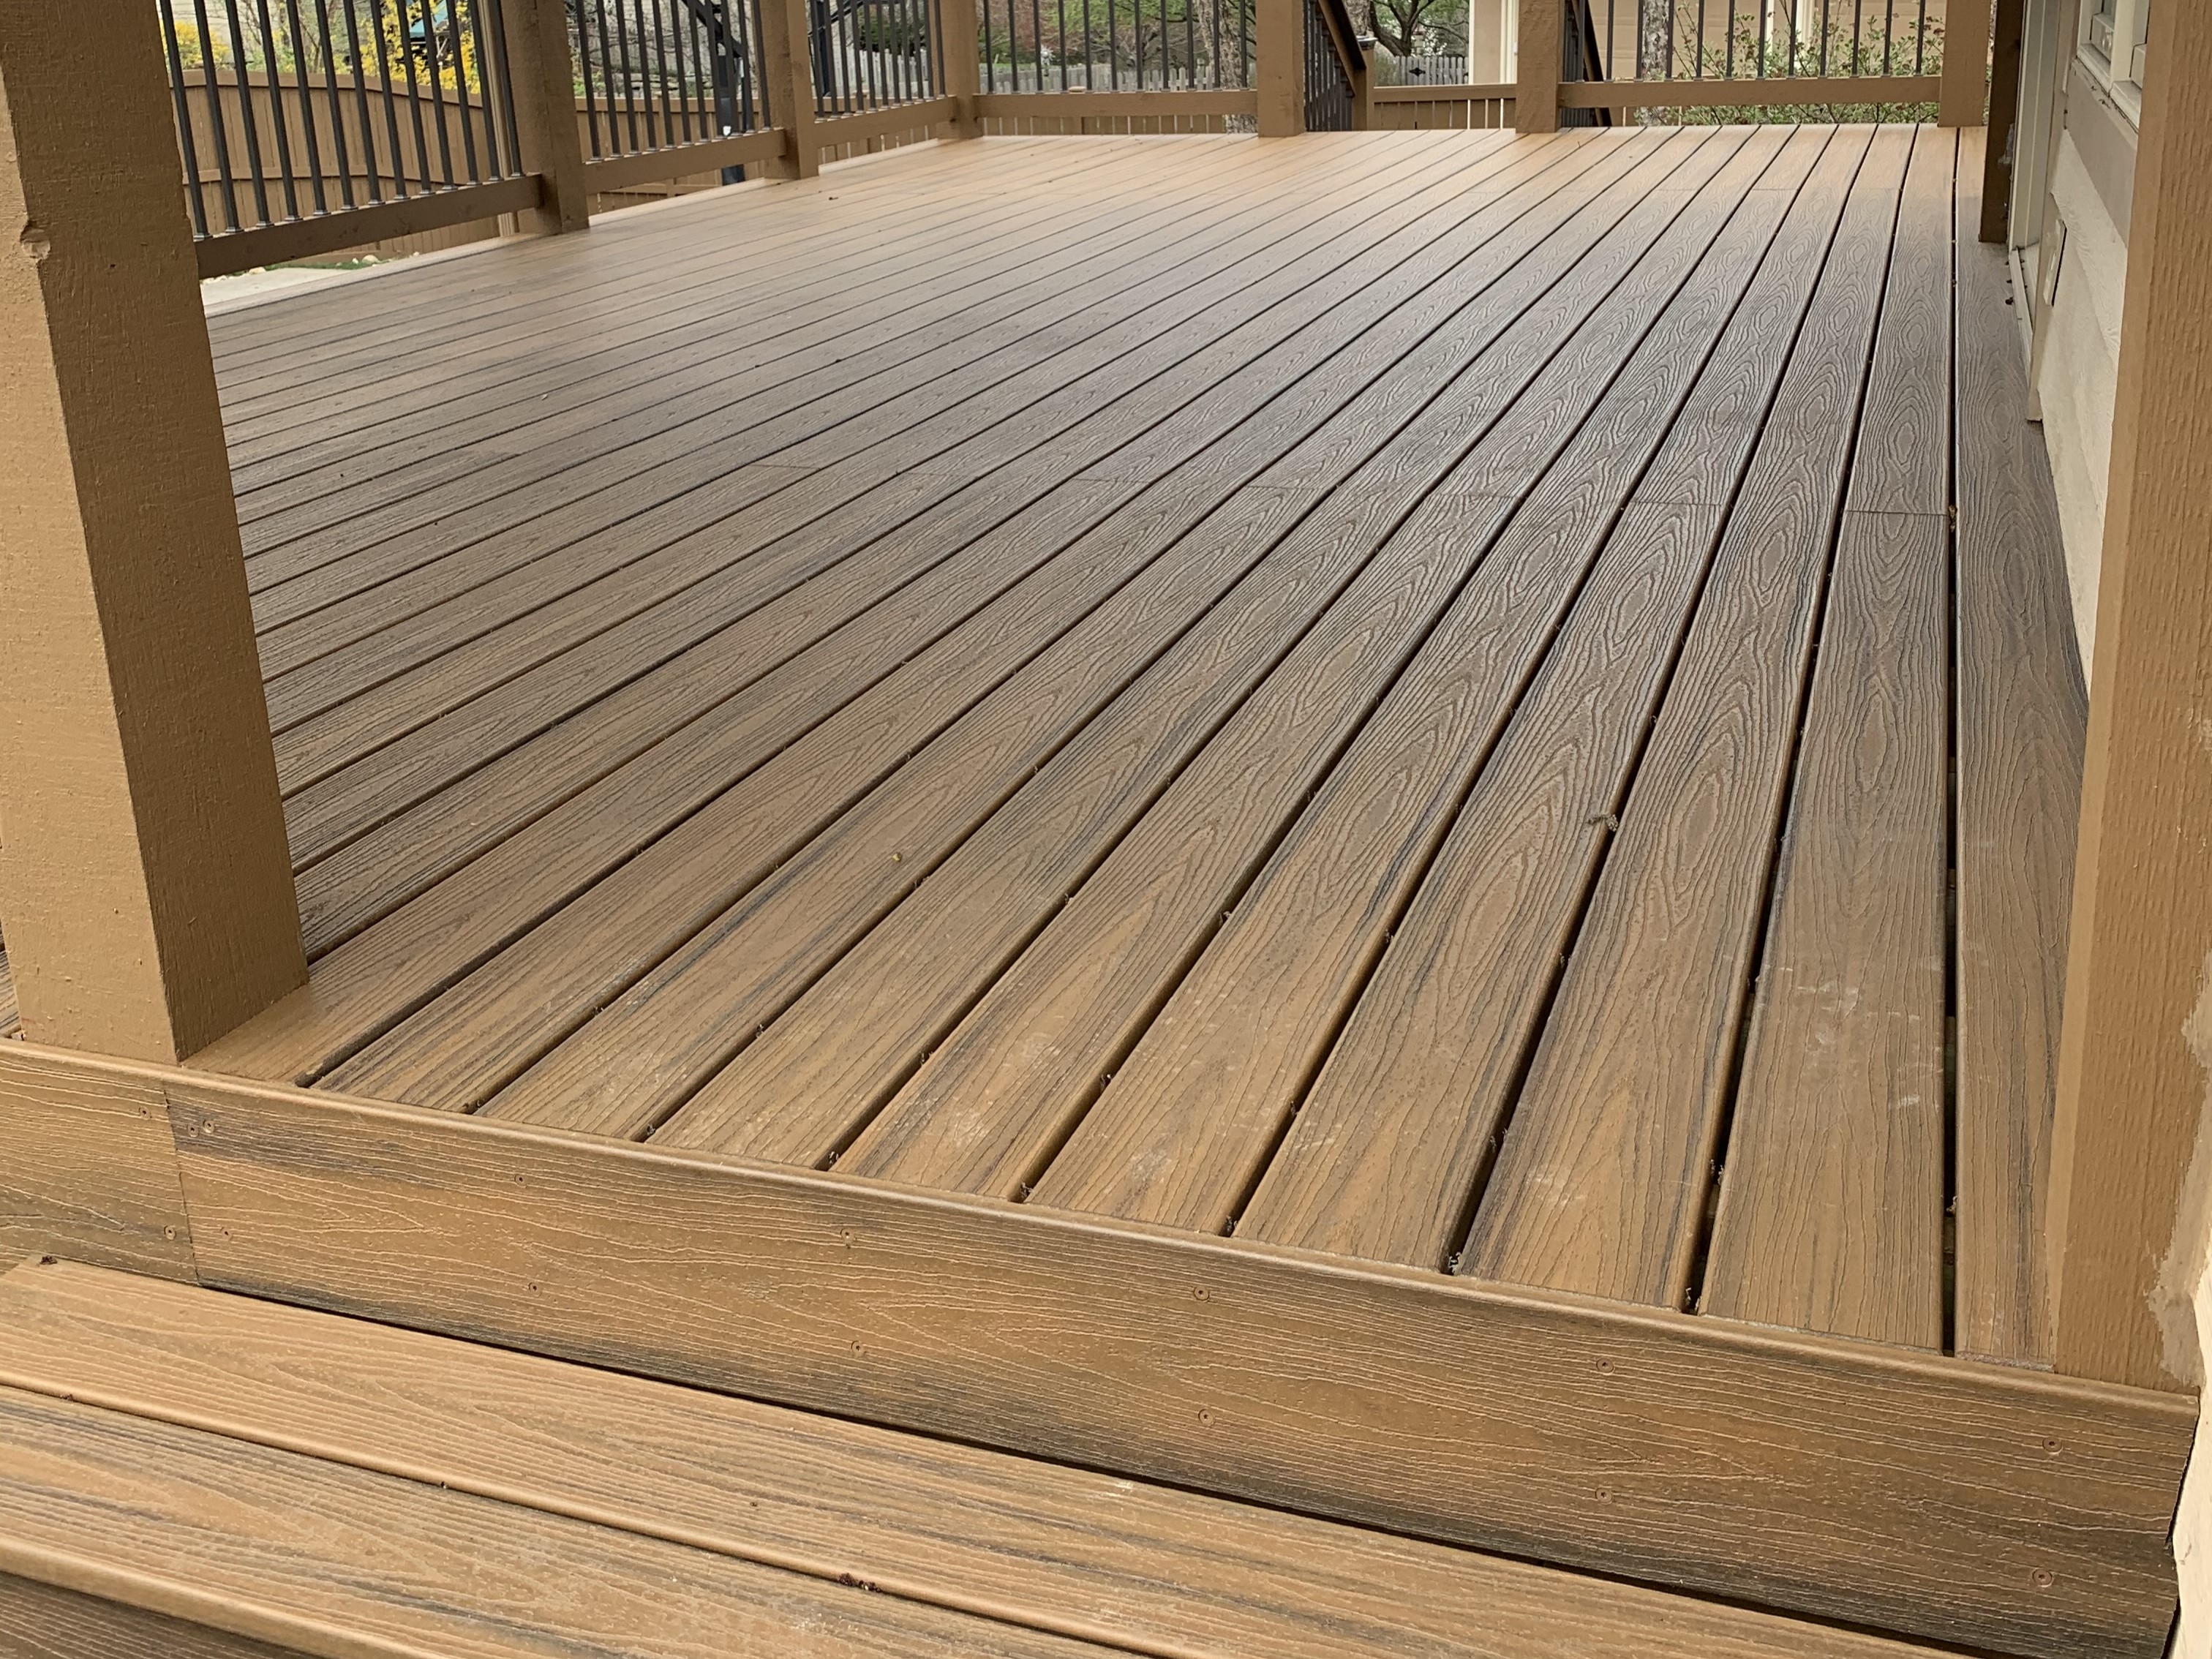 light brown deck floor with brown railing and steps